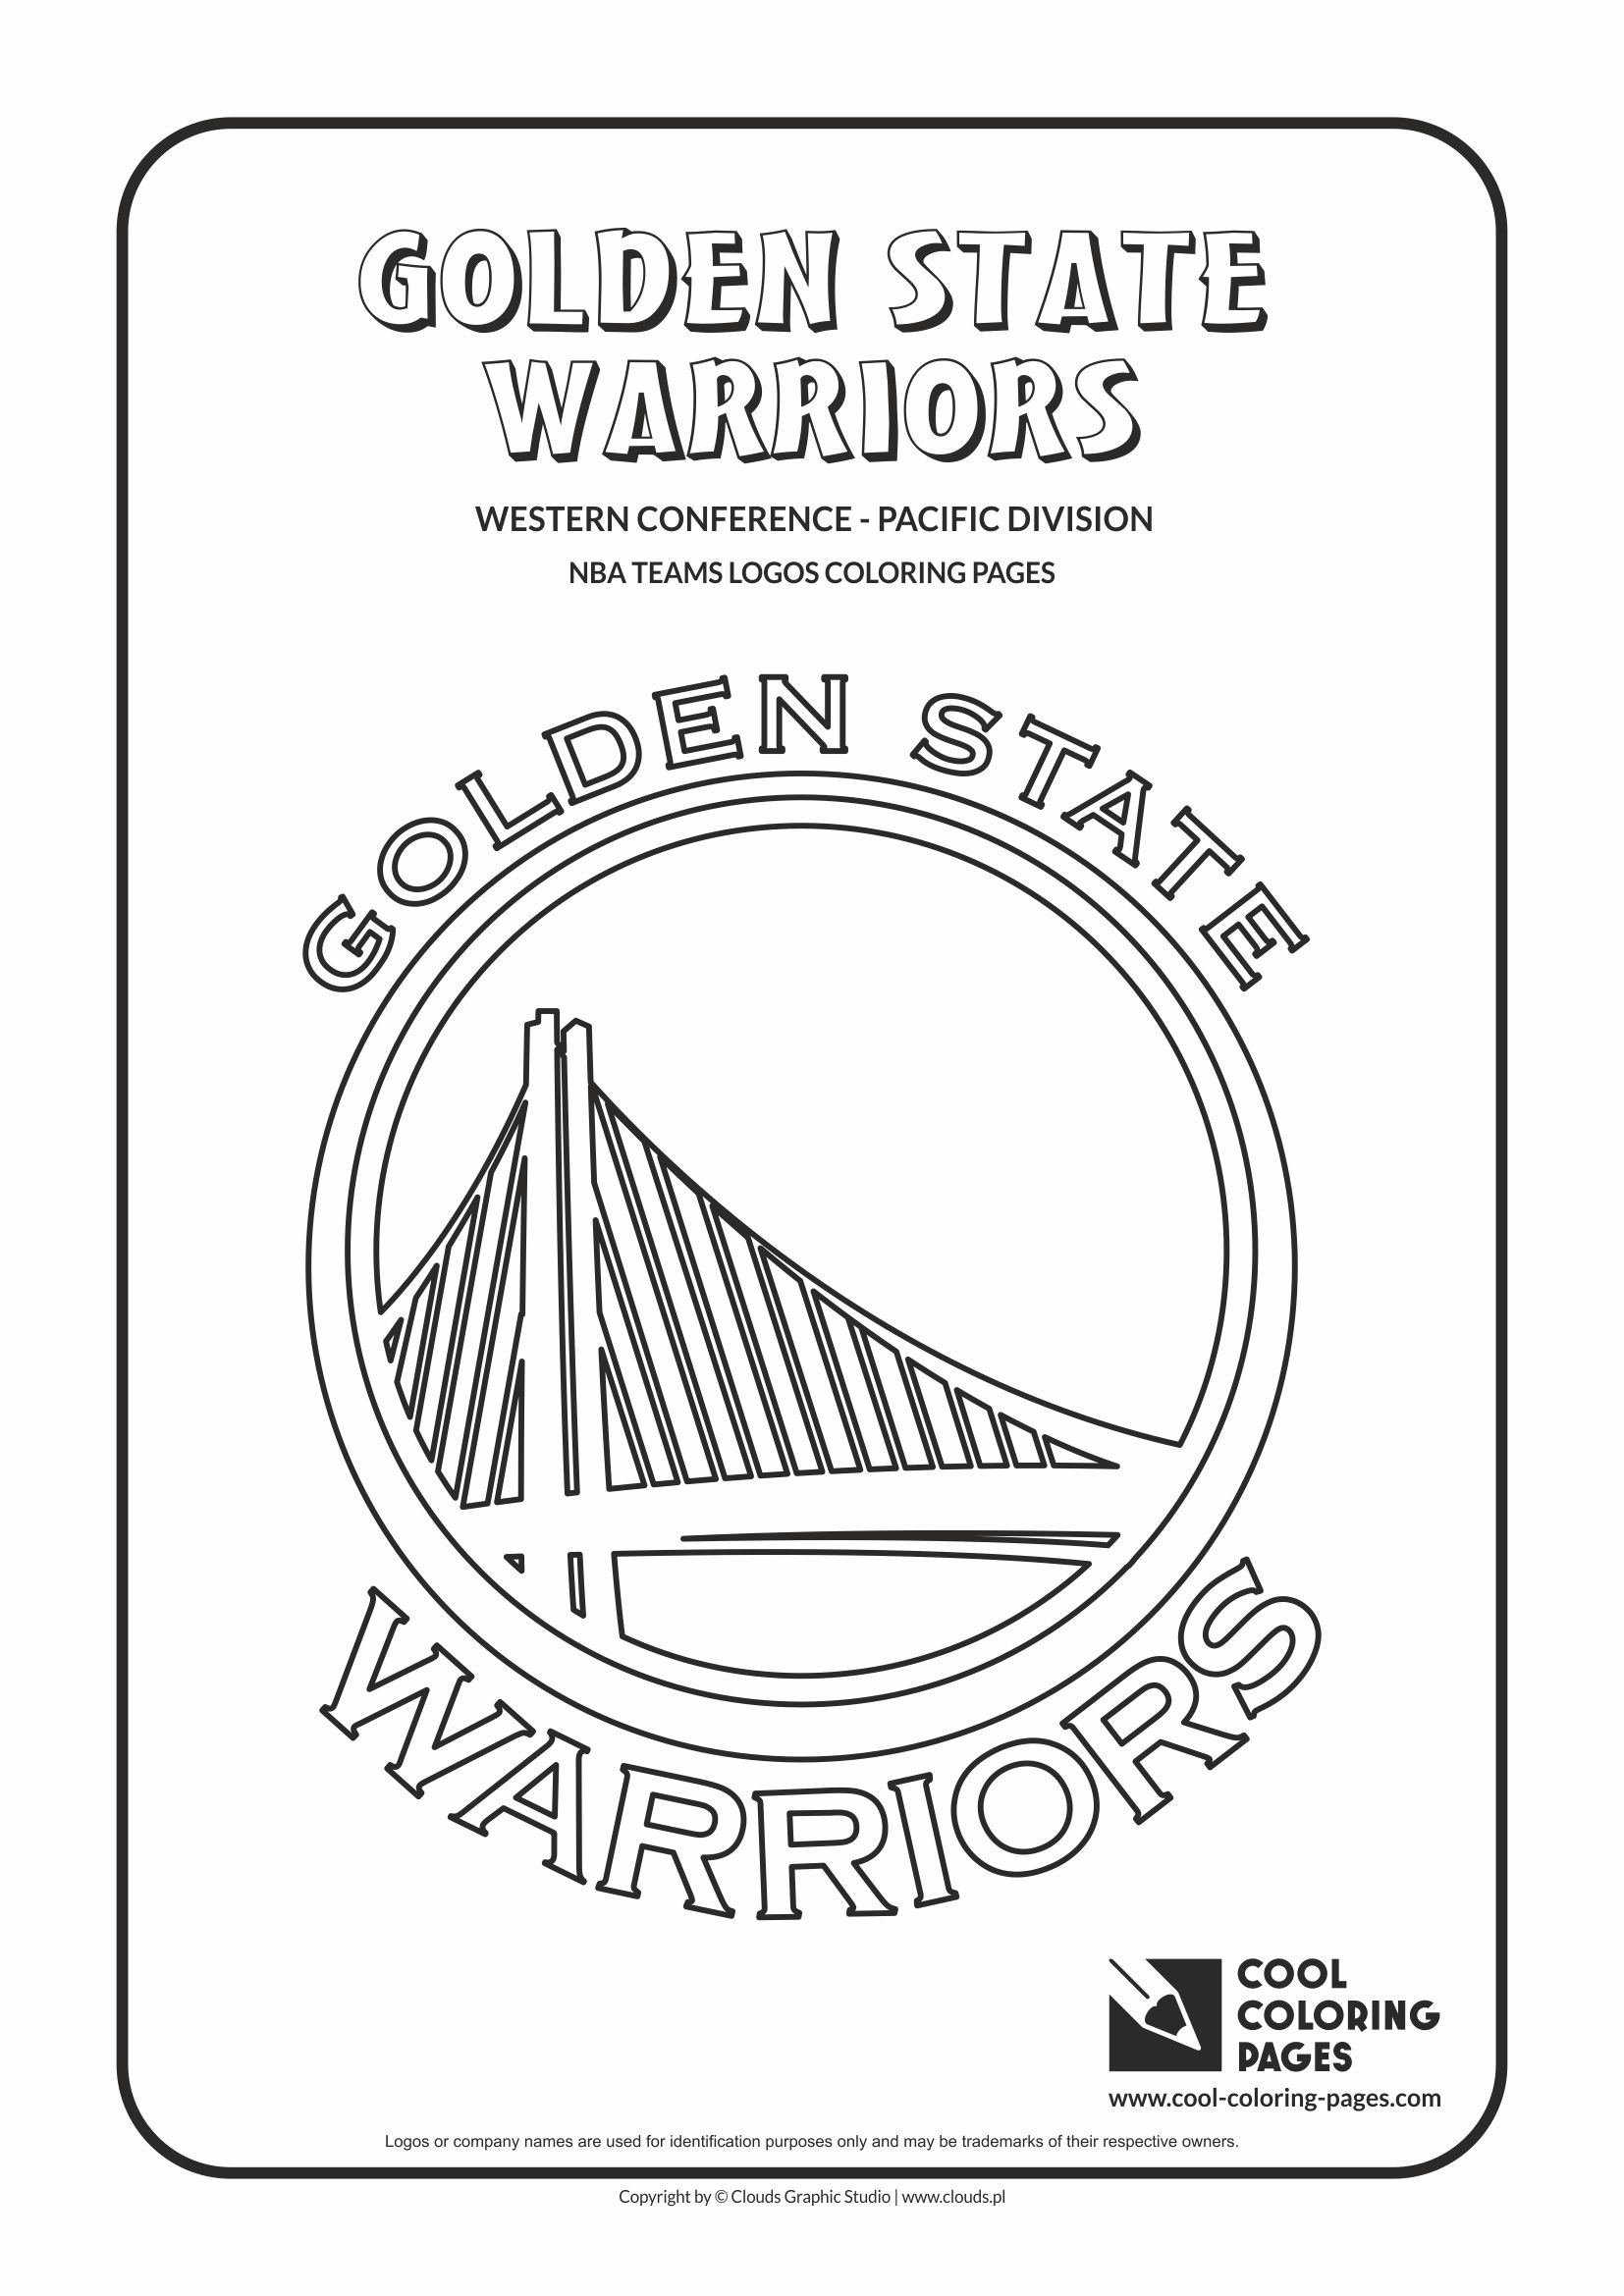 Golden State Warriors Nba Basketball Teams Logos Coloring Pages Cool